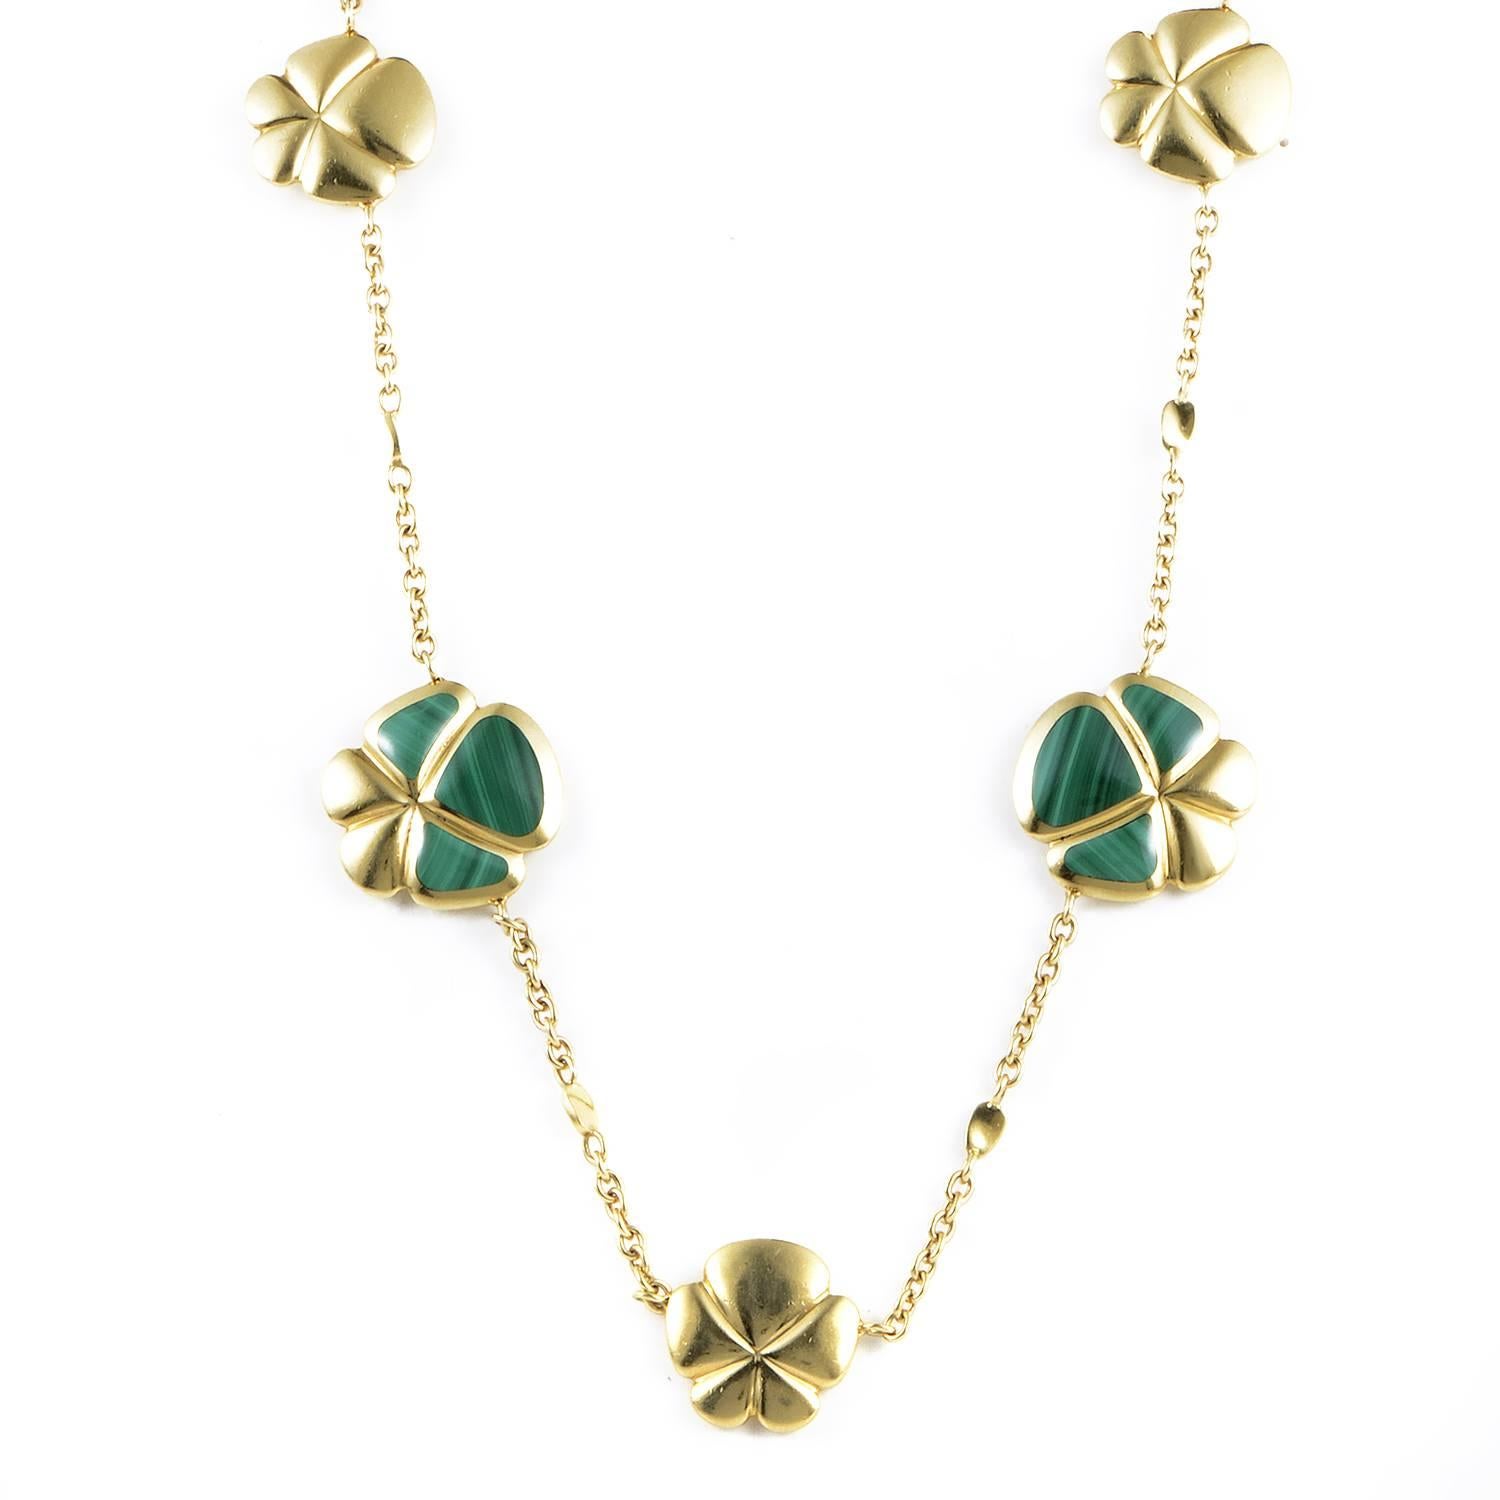 Fittingly employed to produce a marvelous appeal in the lovely floral motifs, the splendidly textured malachite stones brilliantly contrast the spotless 18K yellow gold in this charming necklace from Ambrosi.
Retail Price: $11,800.00 (Plus